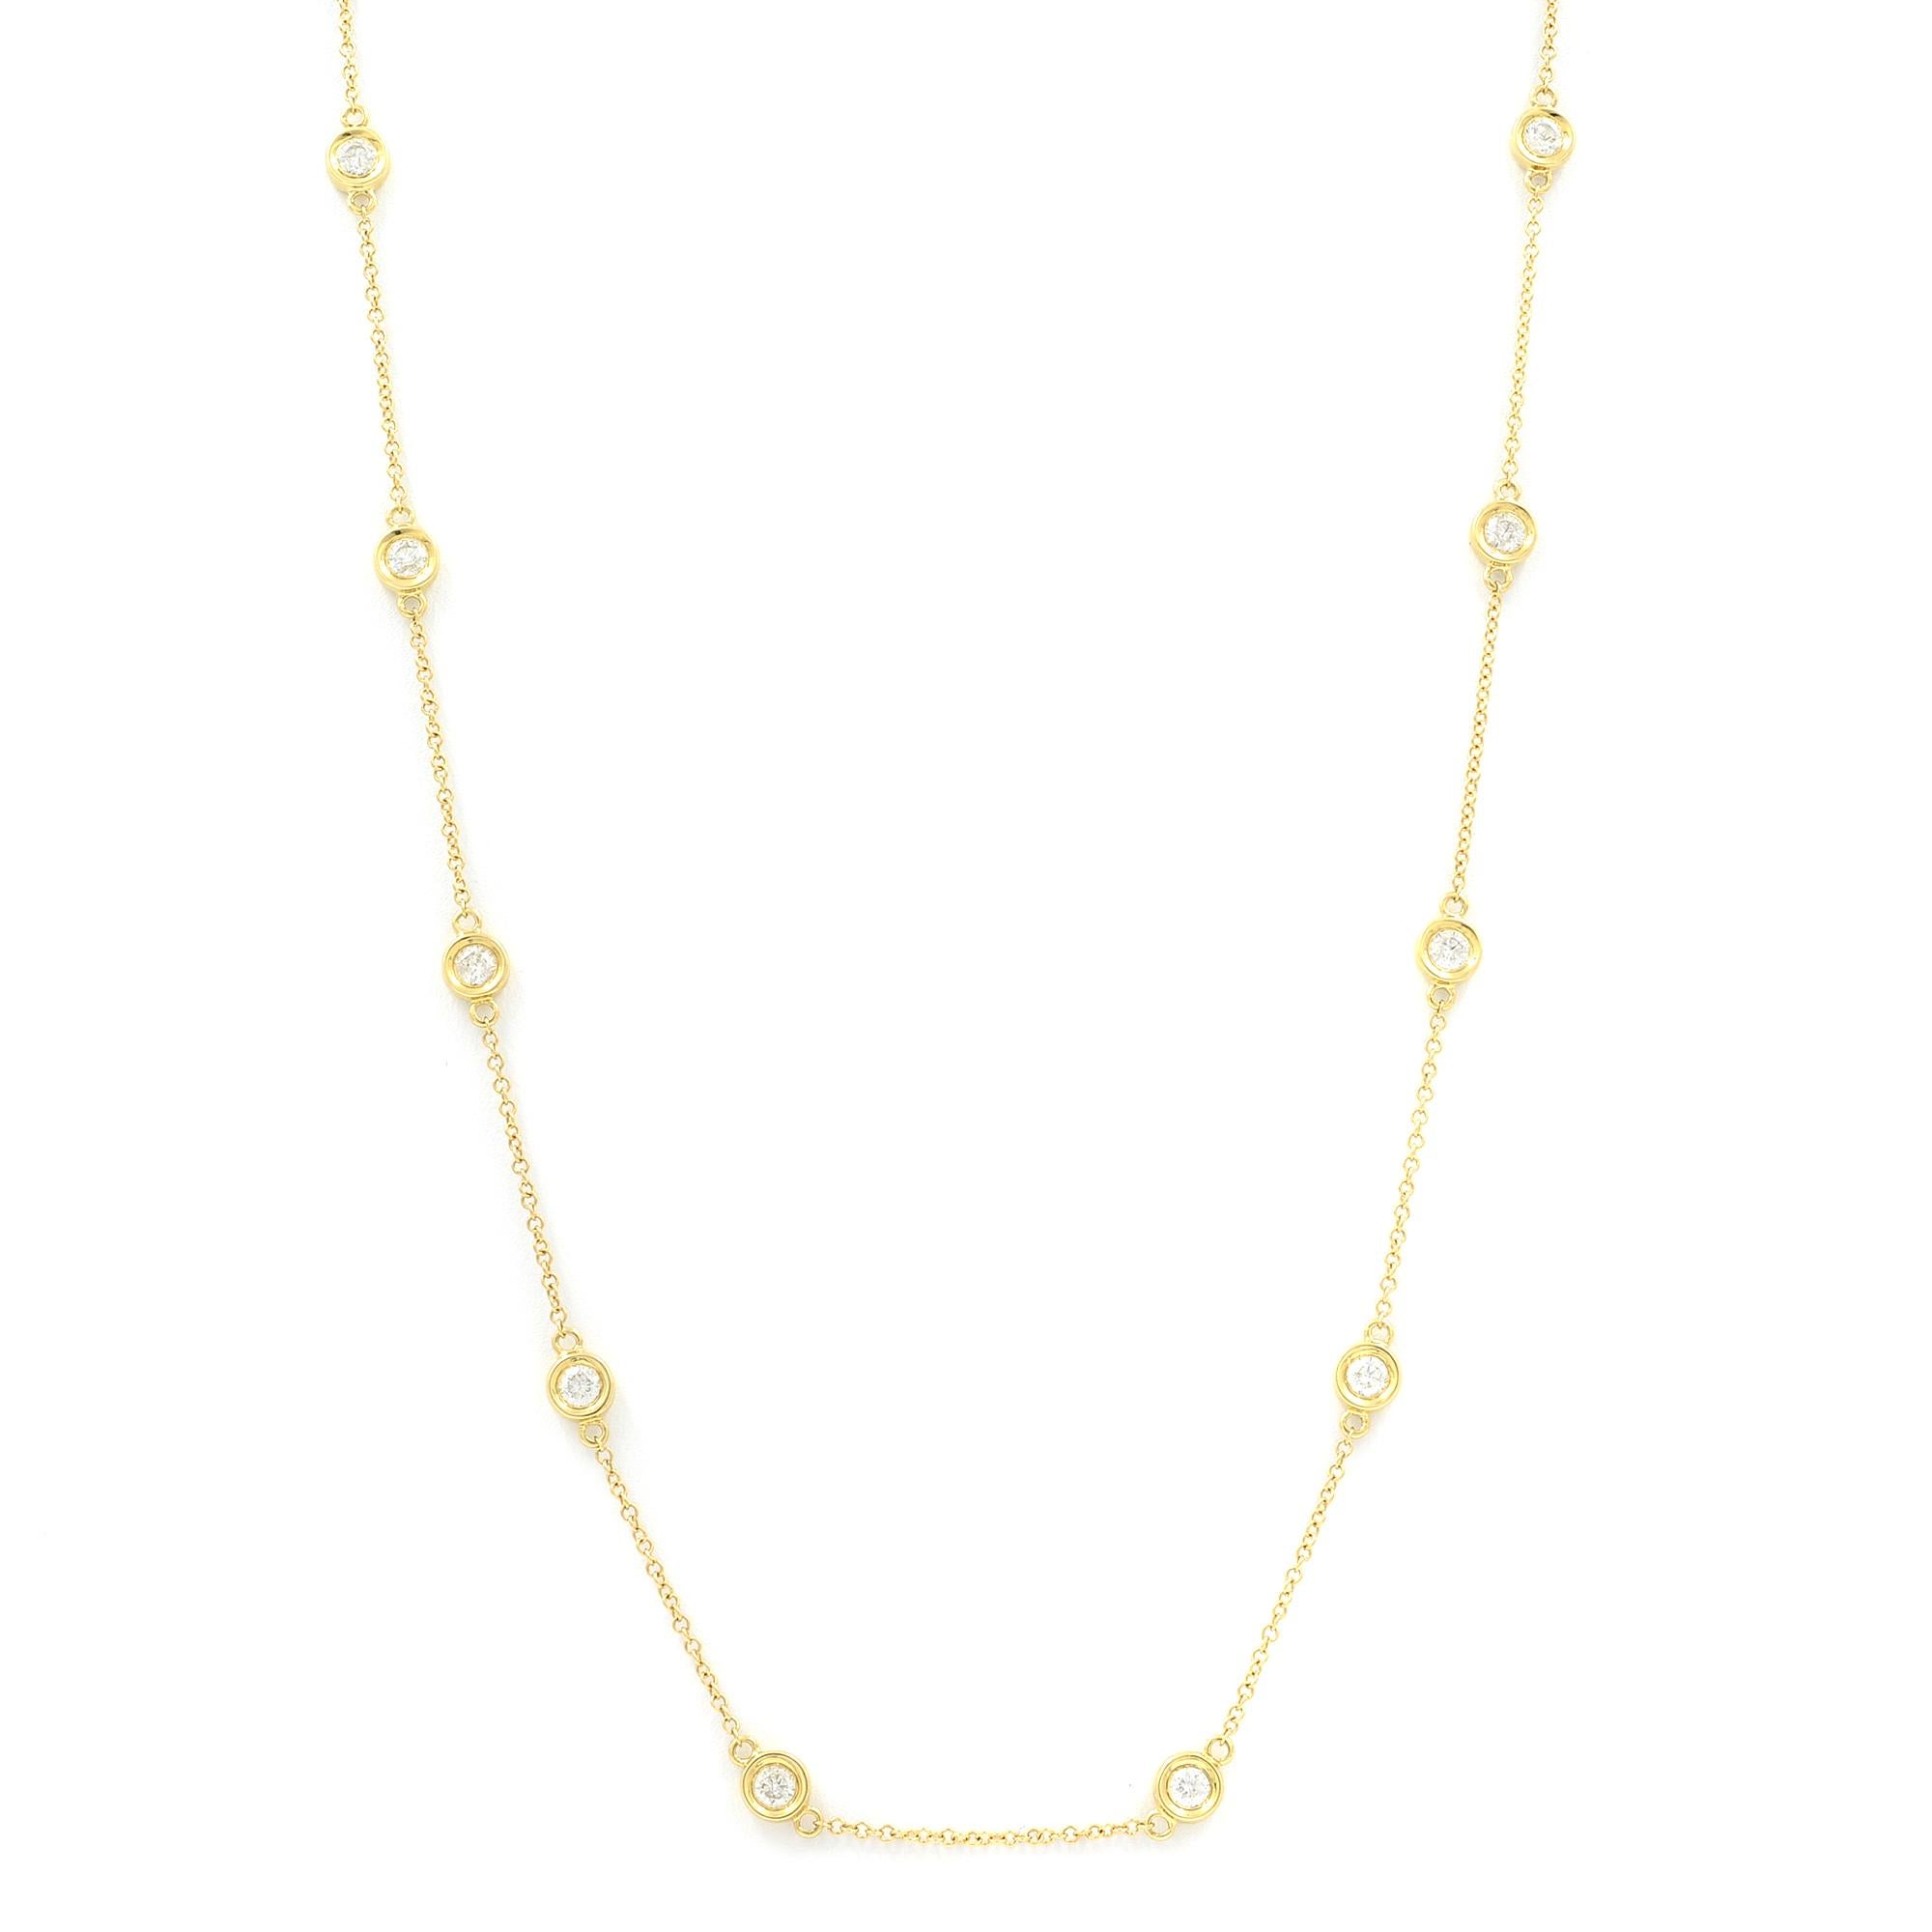 Rachel Koen Diamonds by the Yard Necklace 14K Yellow Gold 0.77Cttw In New Condition For Sale In New York, NY